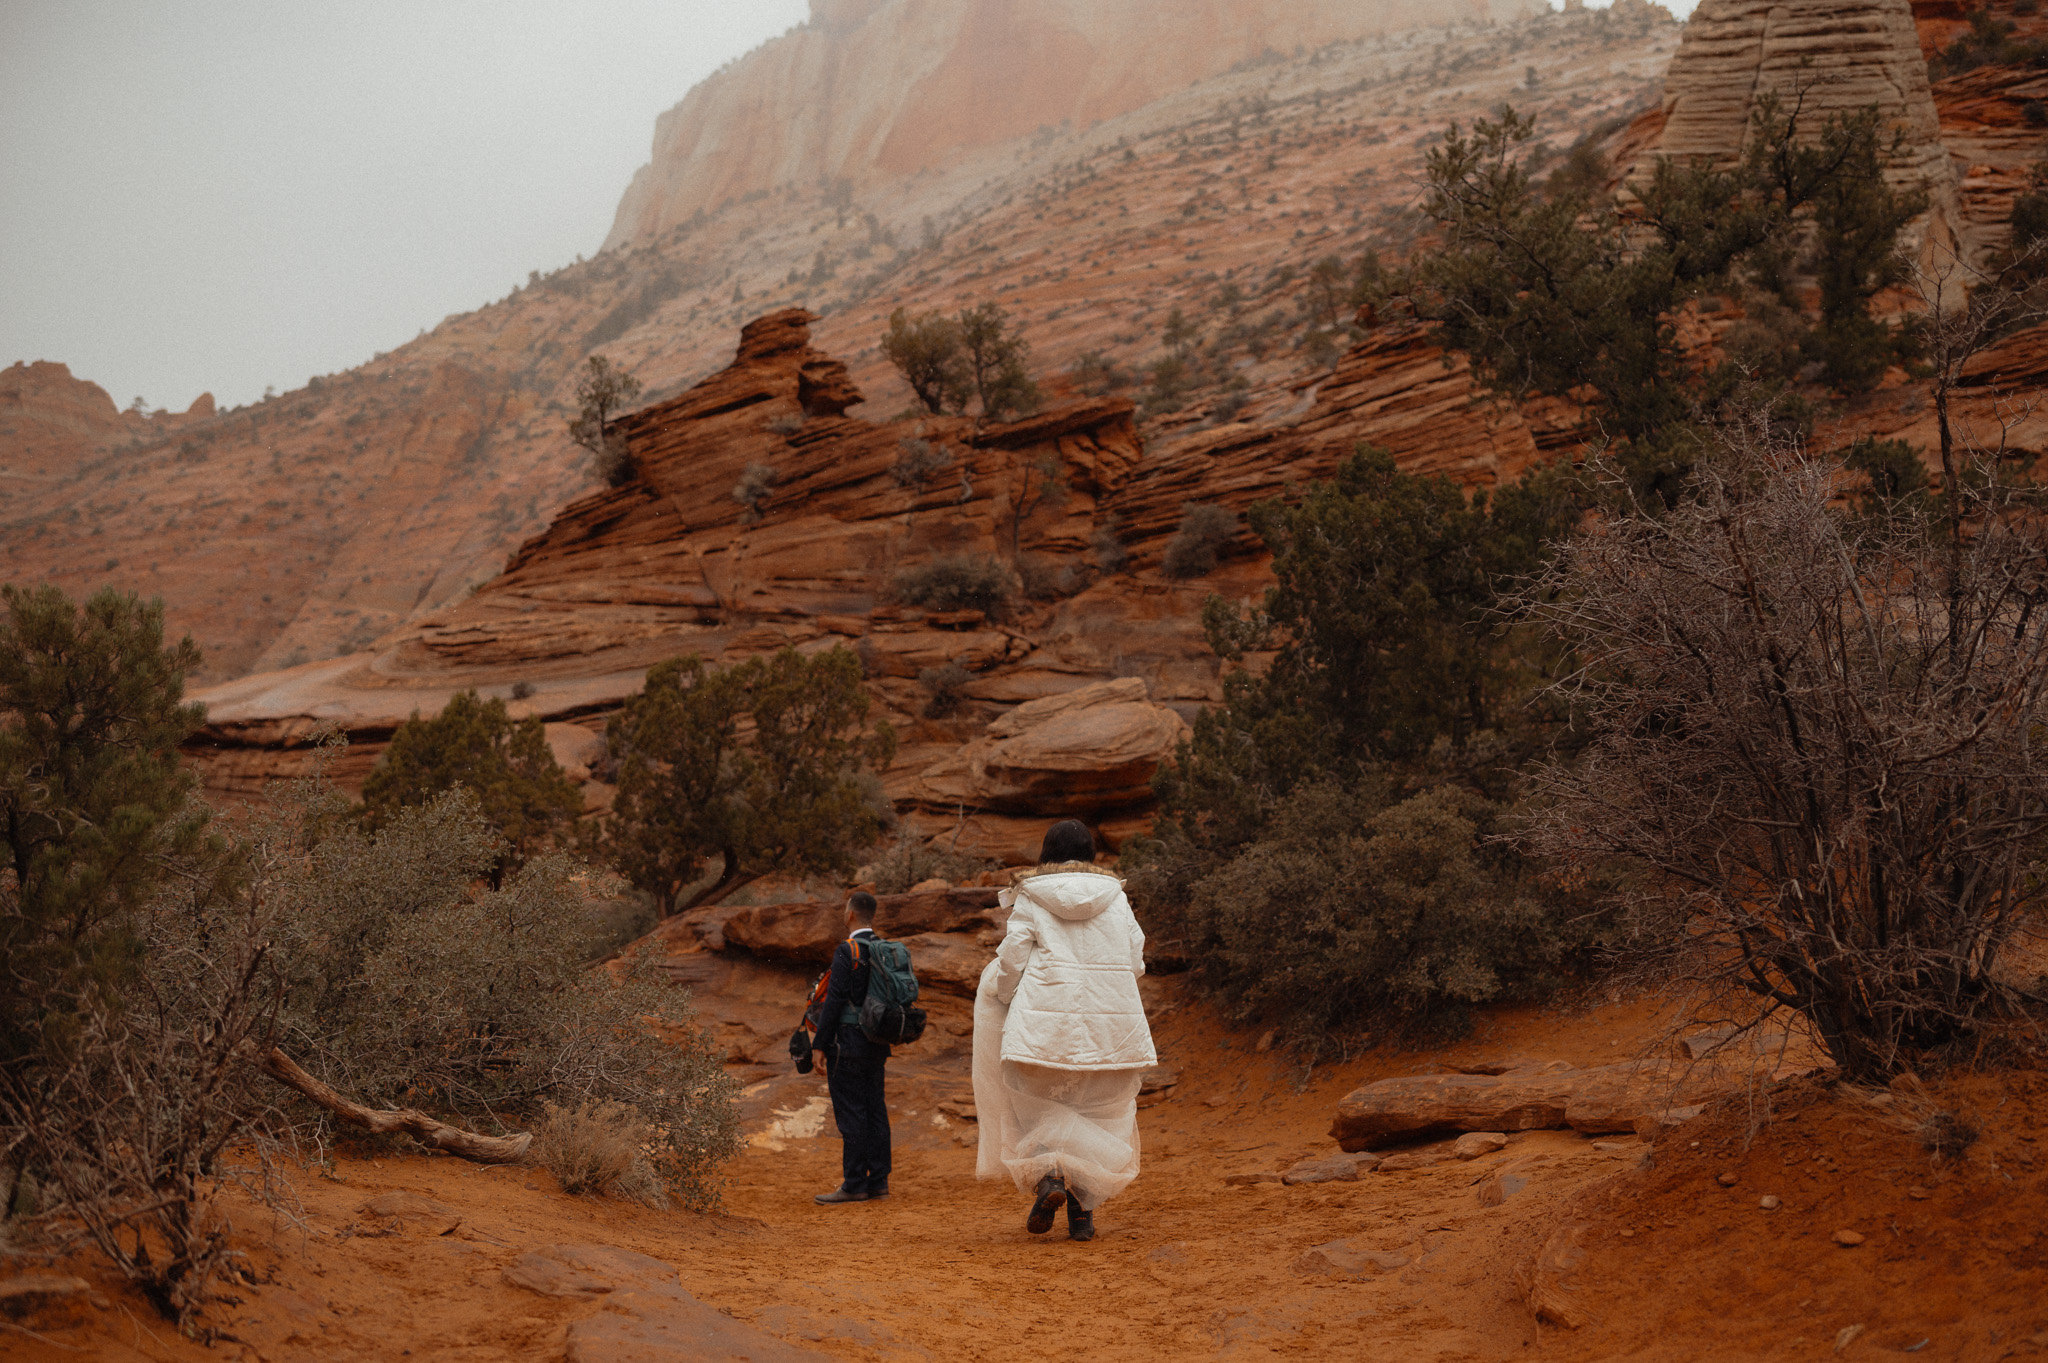 guide to eloping zion national park how to